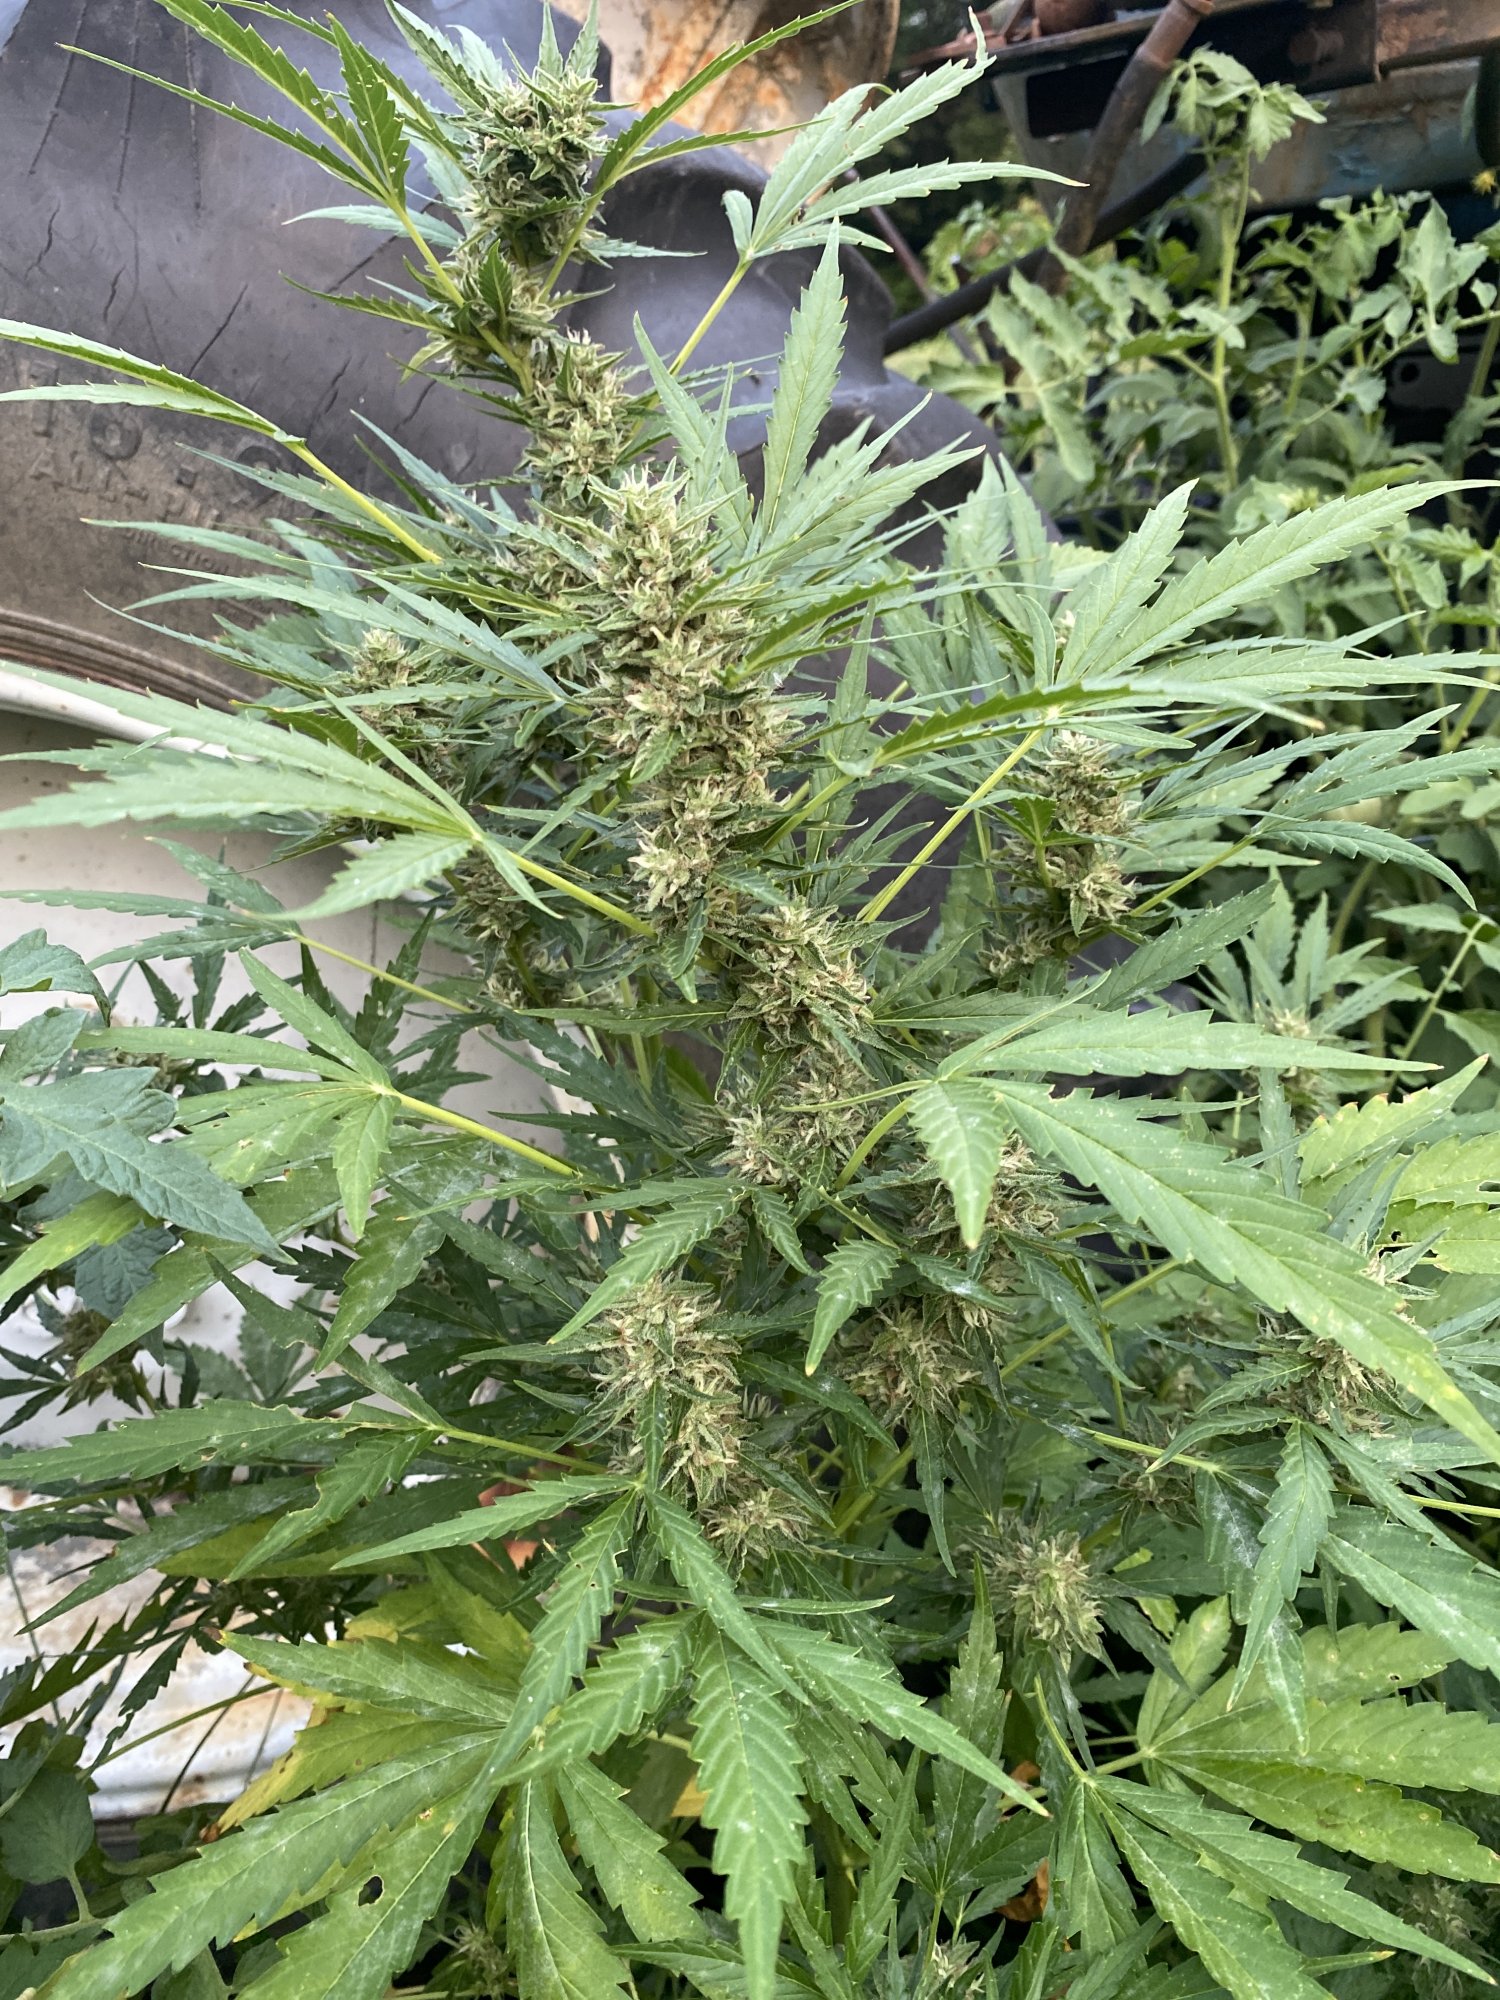 Someone please help me confirm that this is ready for harvest